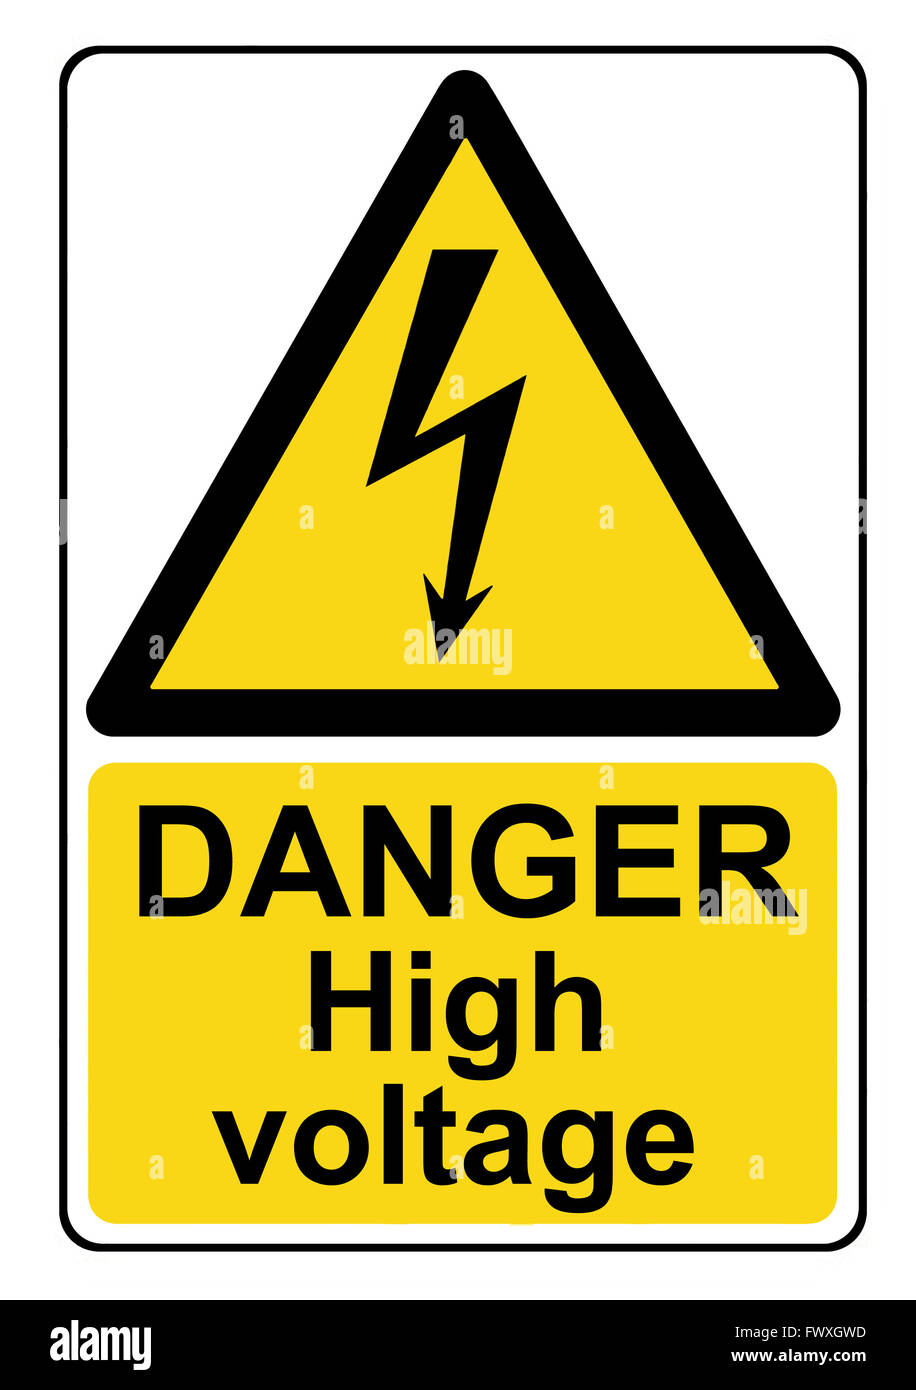 Danger high voltage yellow warning sign Stock Photo